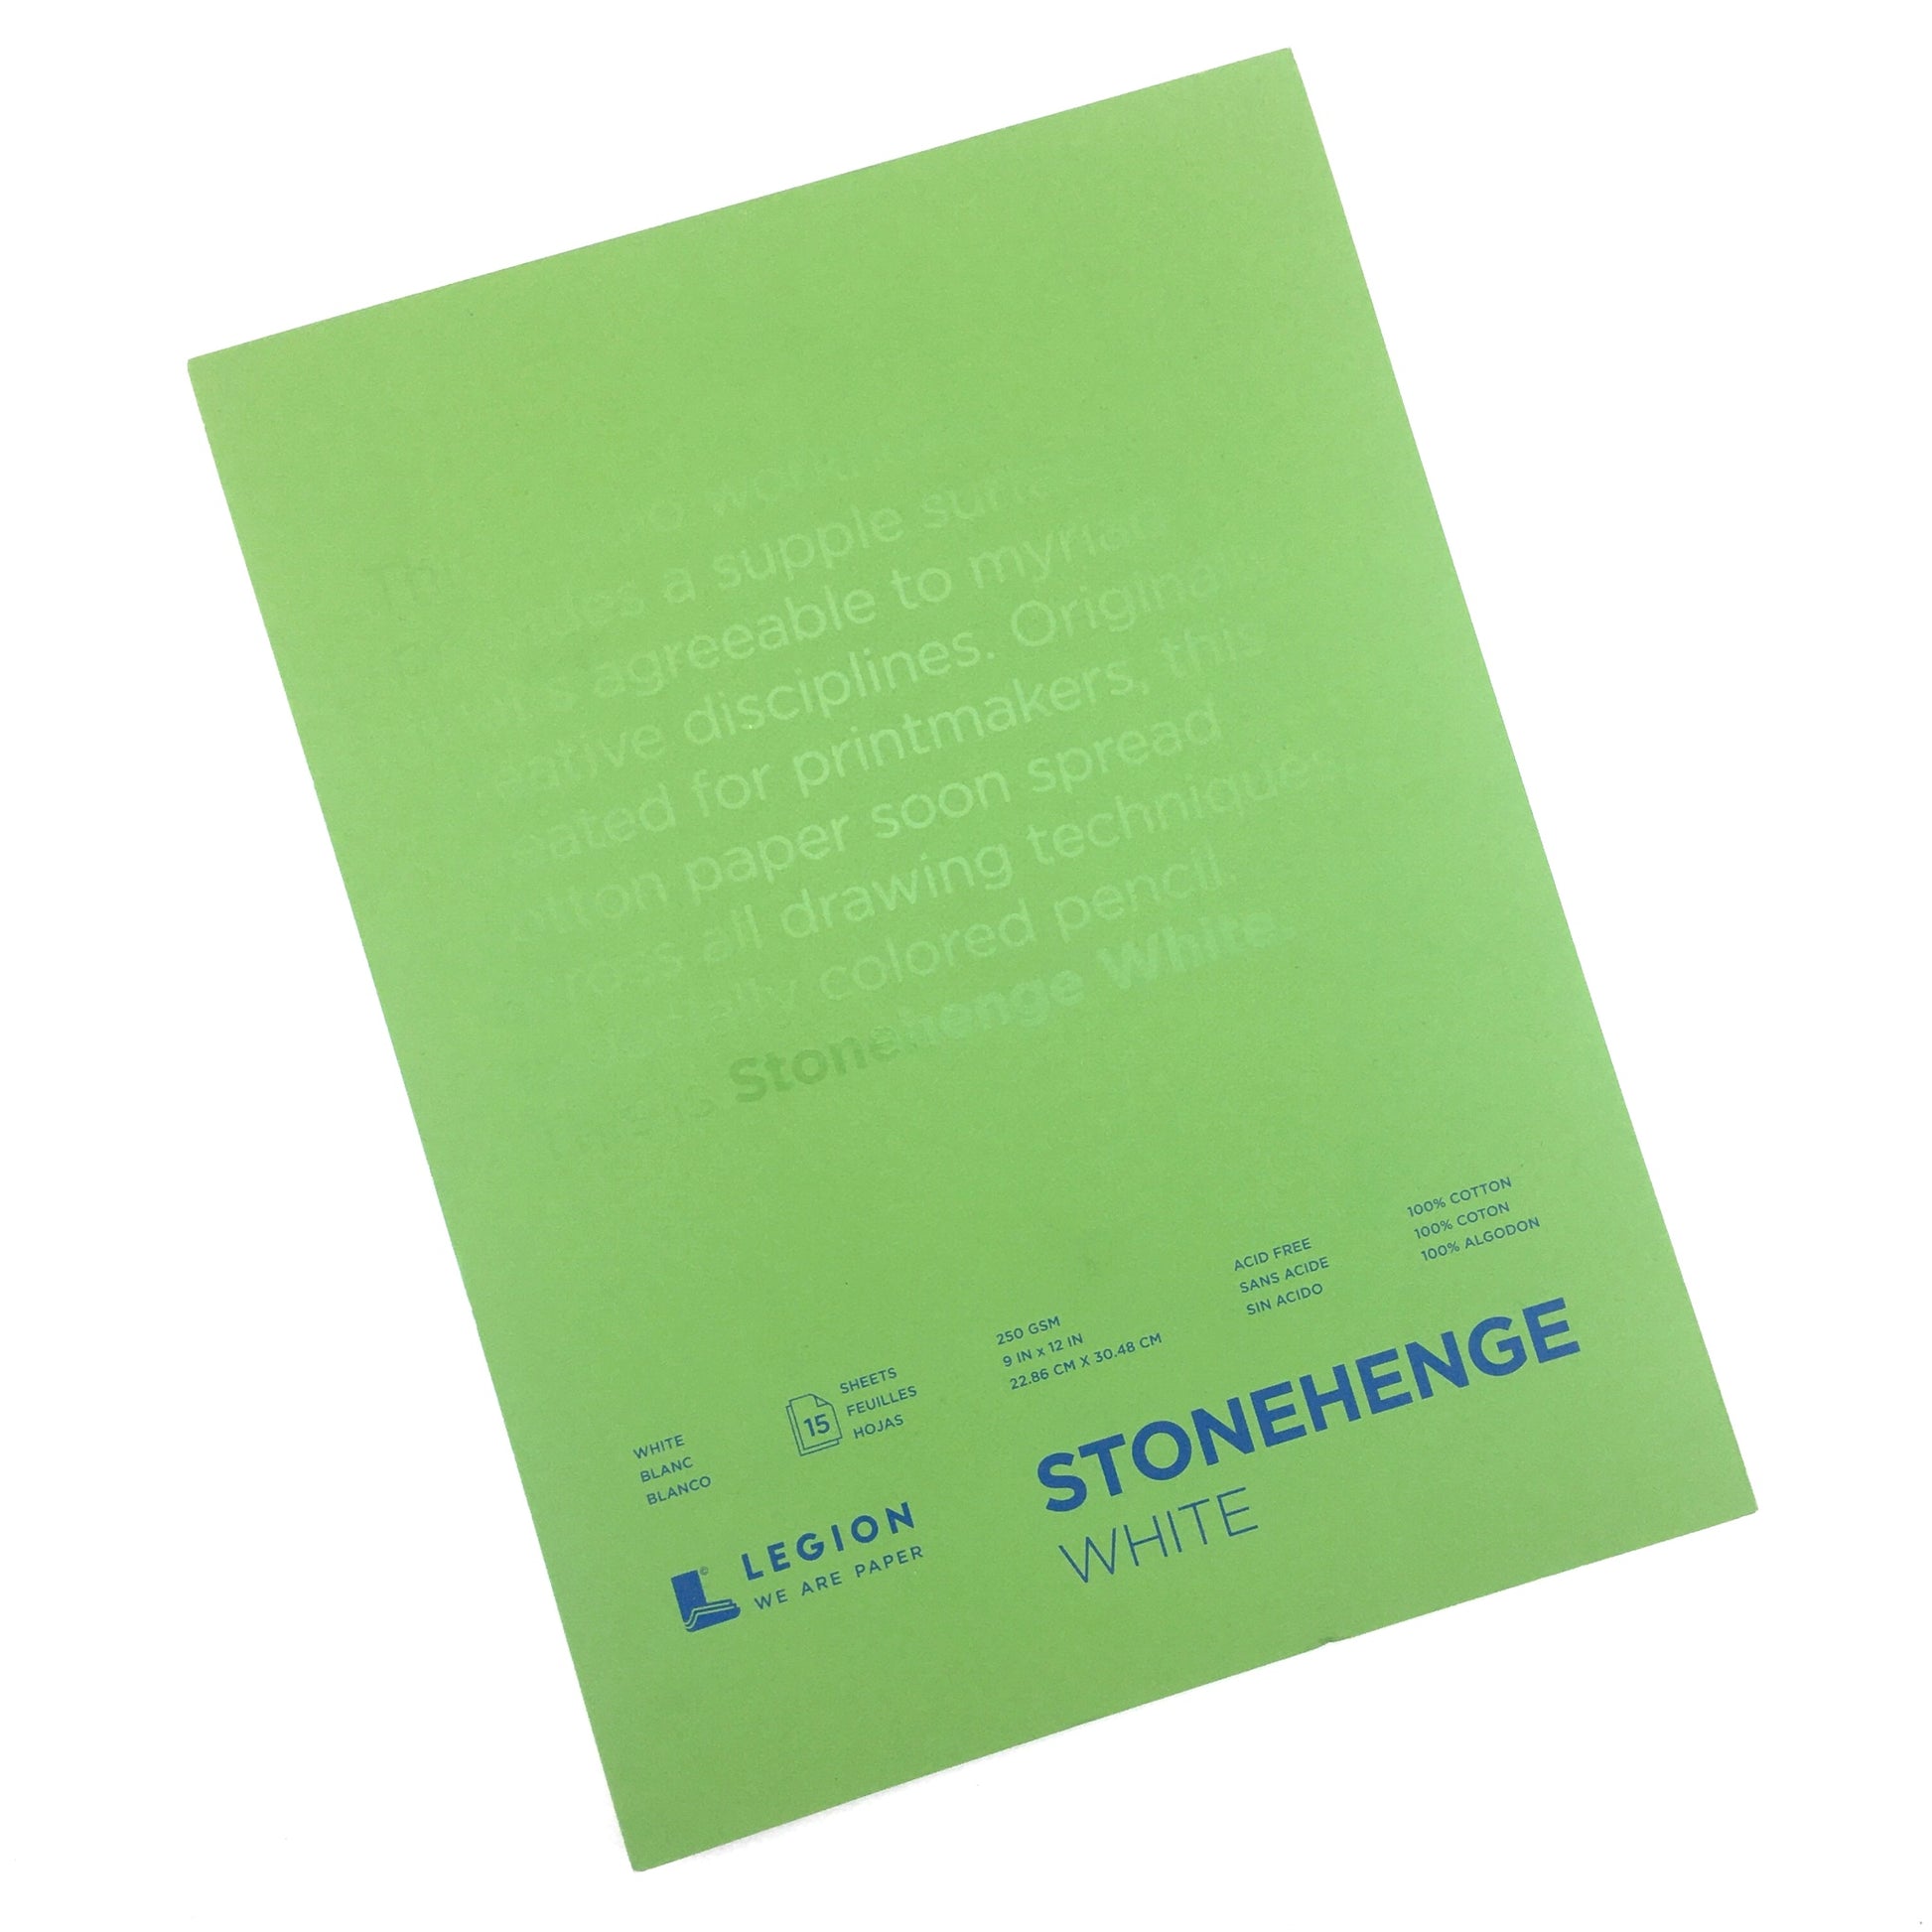 Legion Stonehenge White Paper Drawing Pad - 9 x 12 inches - by Stonehenge - K. A. Artist Shop